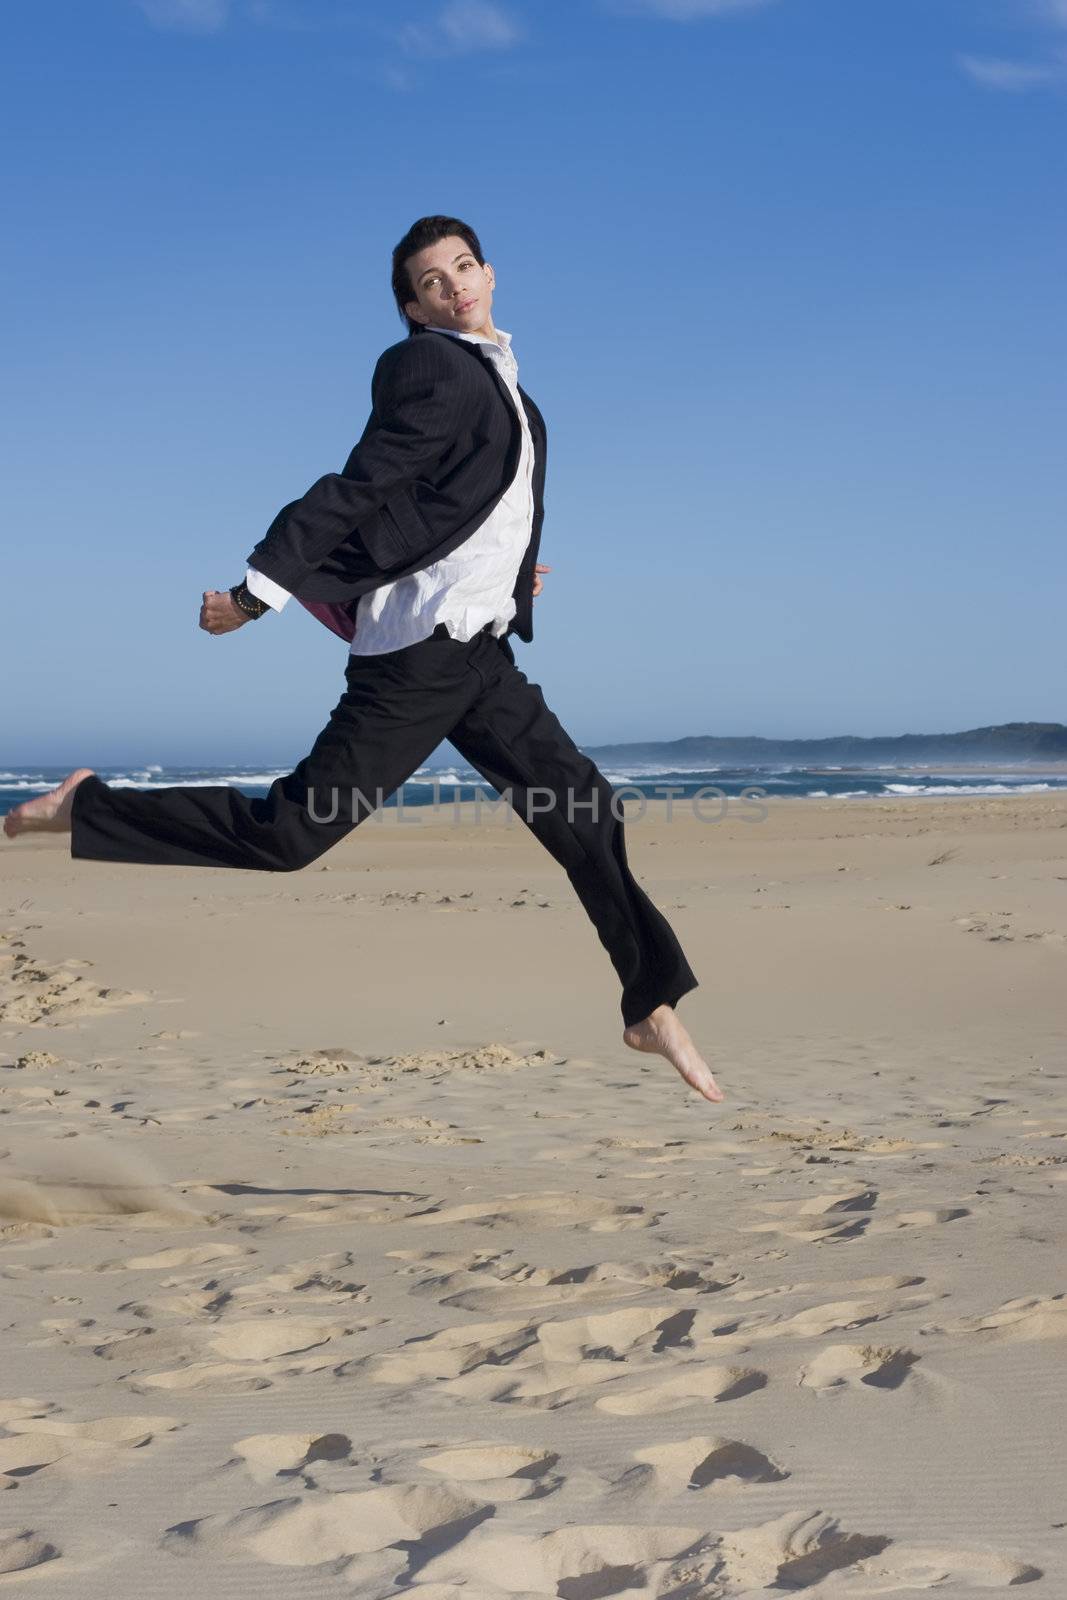 Young professional jumping wearing a business suit